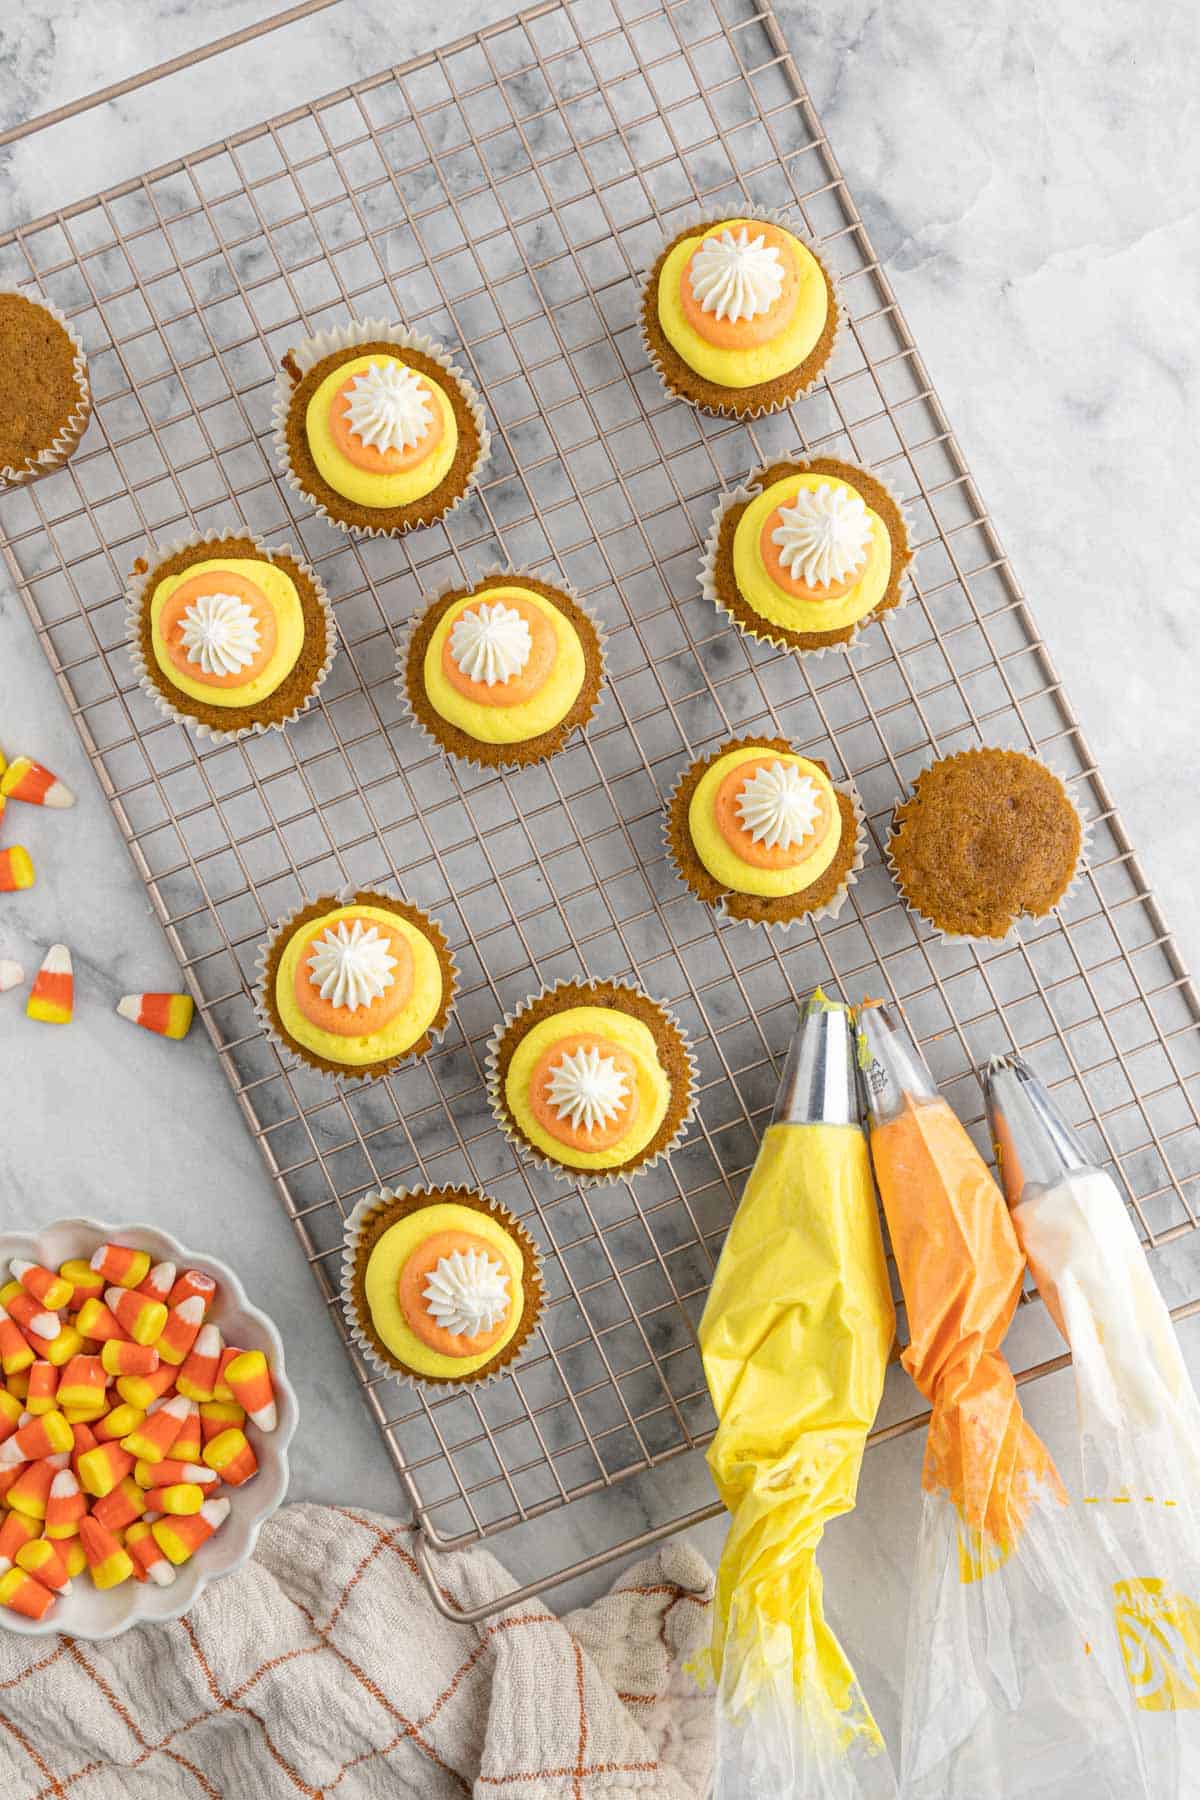 Decorated pumpkin cupcakes on a wire rack on the table.